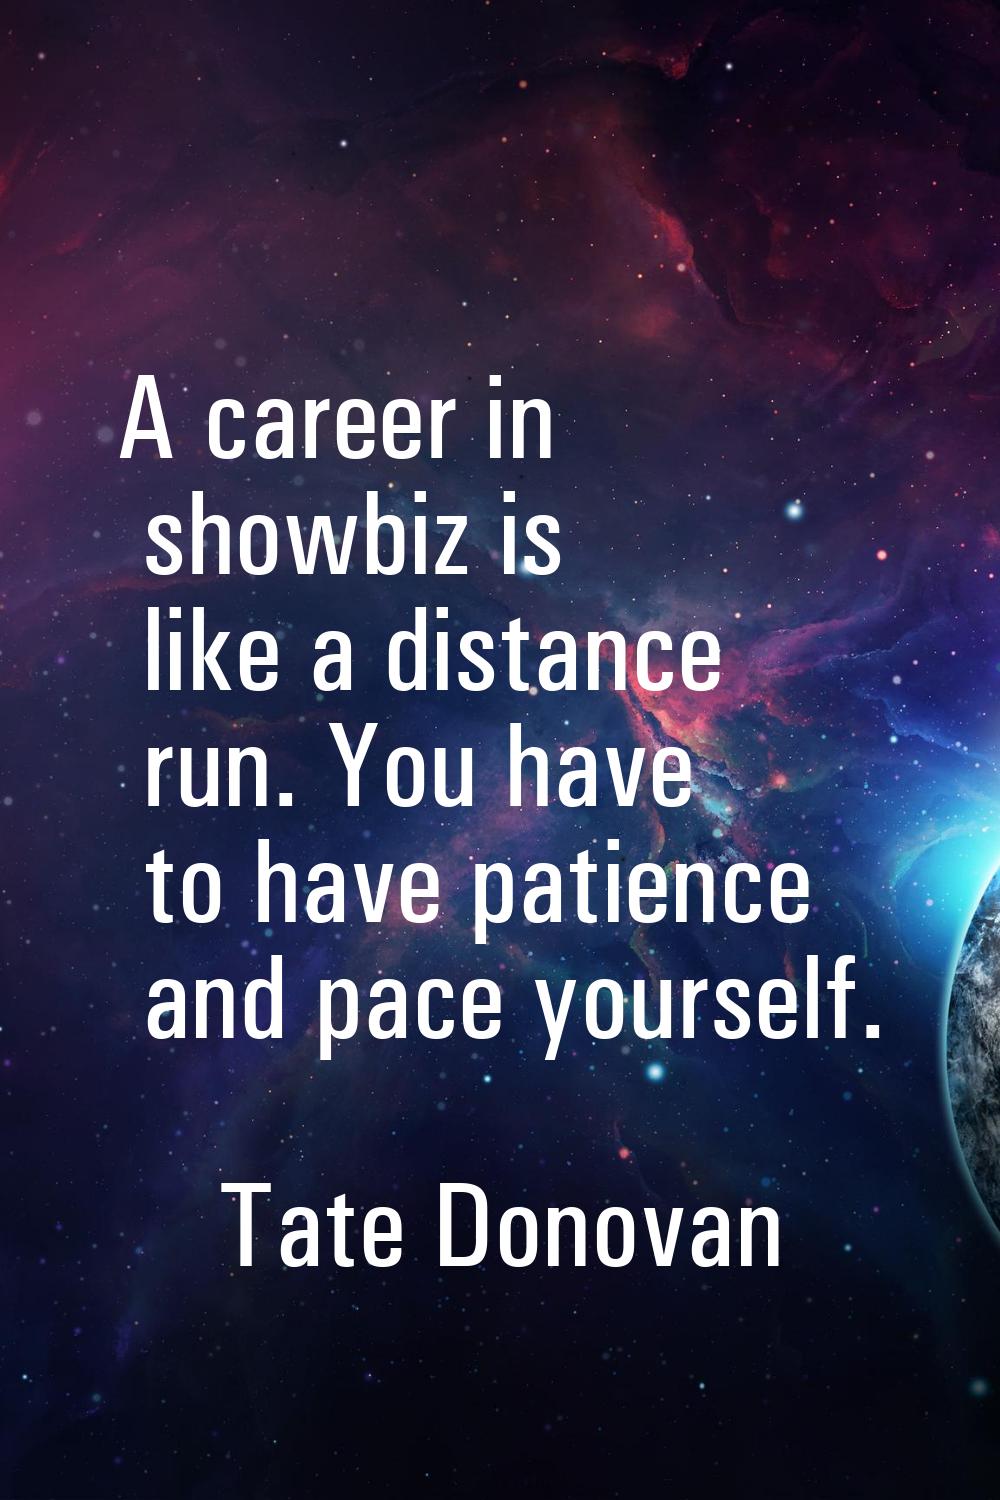 A career in showbiz is like a distance run. You have to have patience and pace yourself.